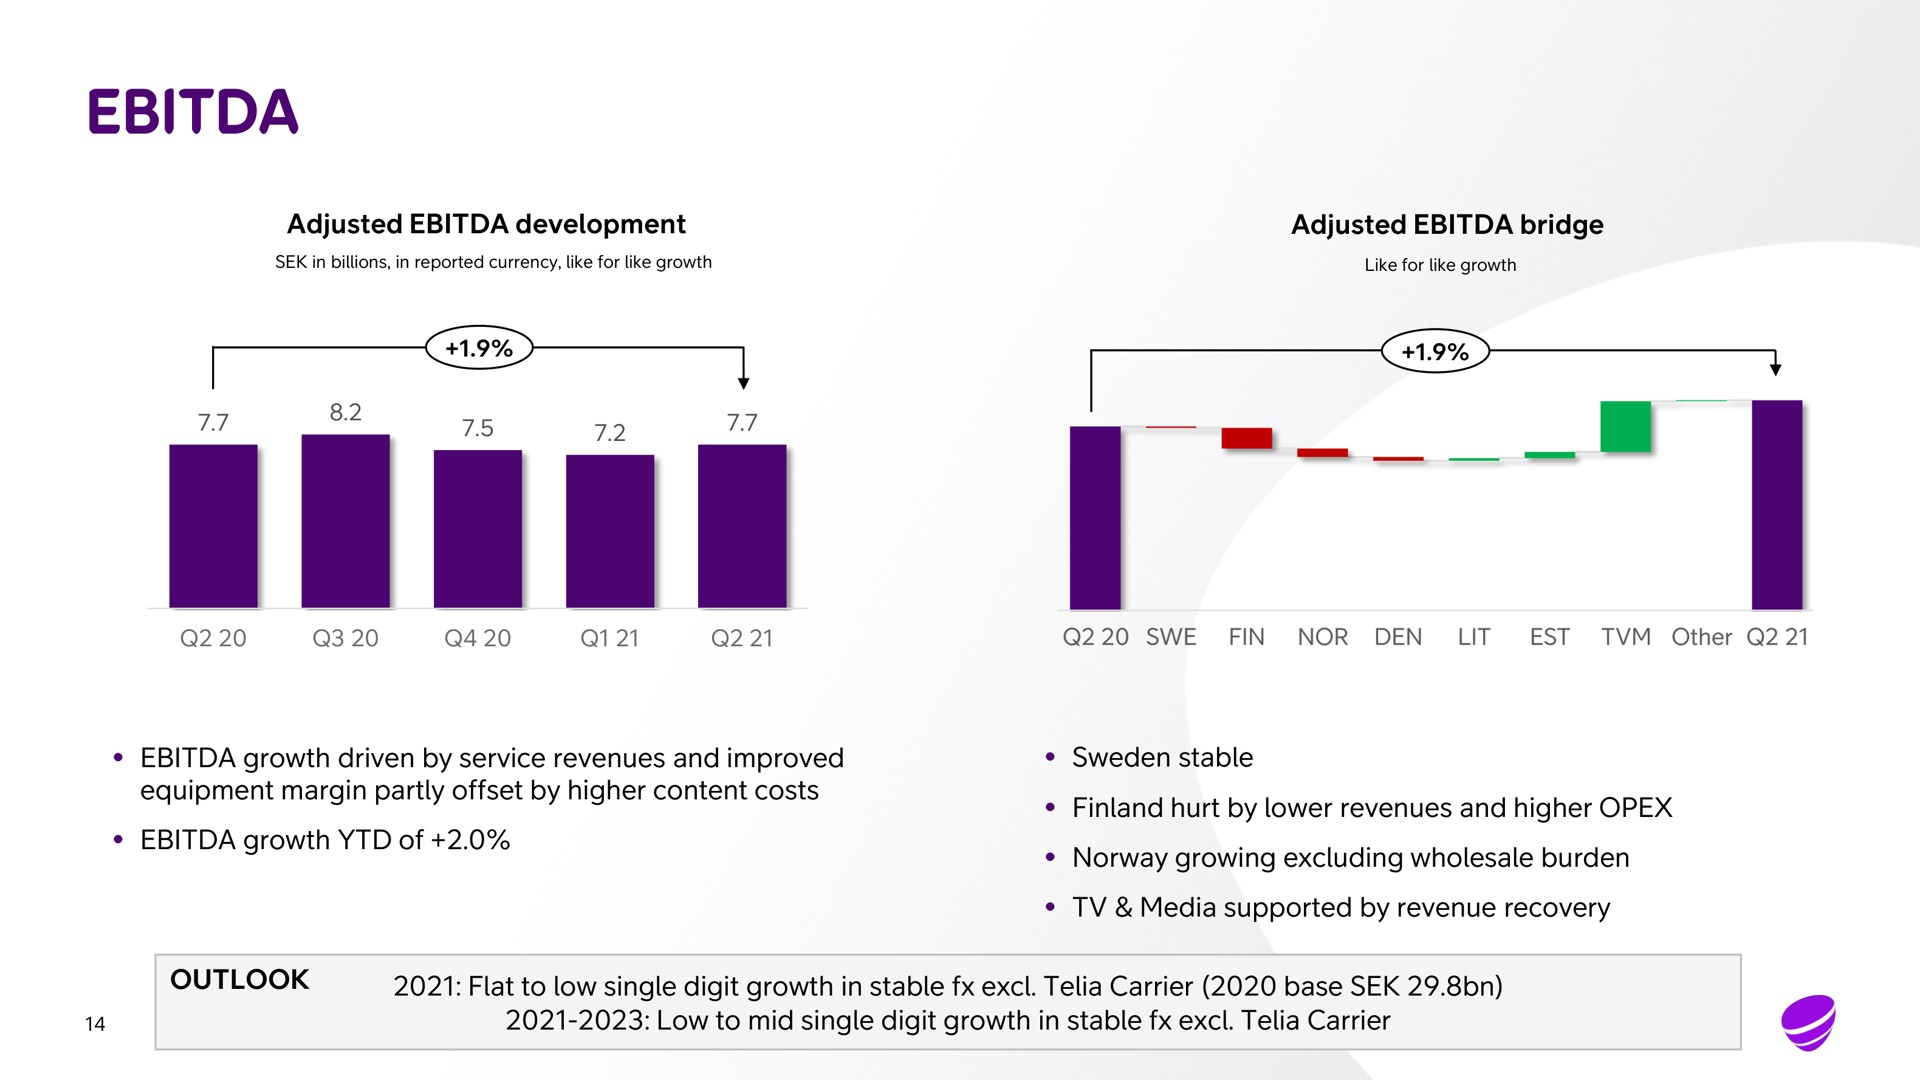 adjusted development adjusted bridge growth driven by service revenues and improved equipment margin partly offset by higher content costs growth of stable finland hurt by lower revenues and higher growing excluding wholesale burden media supported by revenue recovery outlook flat to low single digit growth in stable carrier base low to mid single digit growth in stable carrier a a | Telia Company